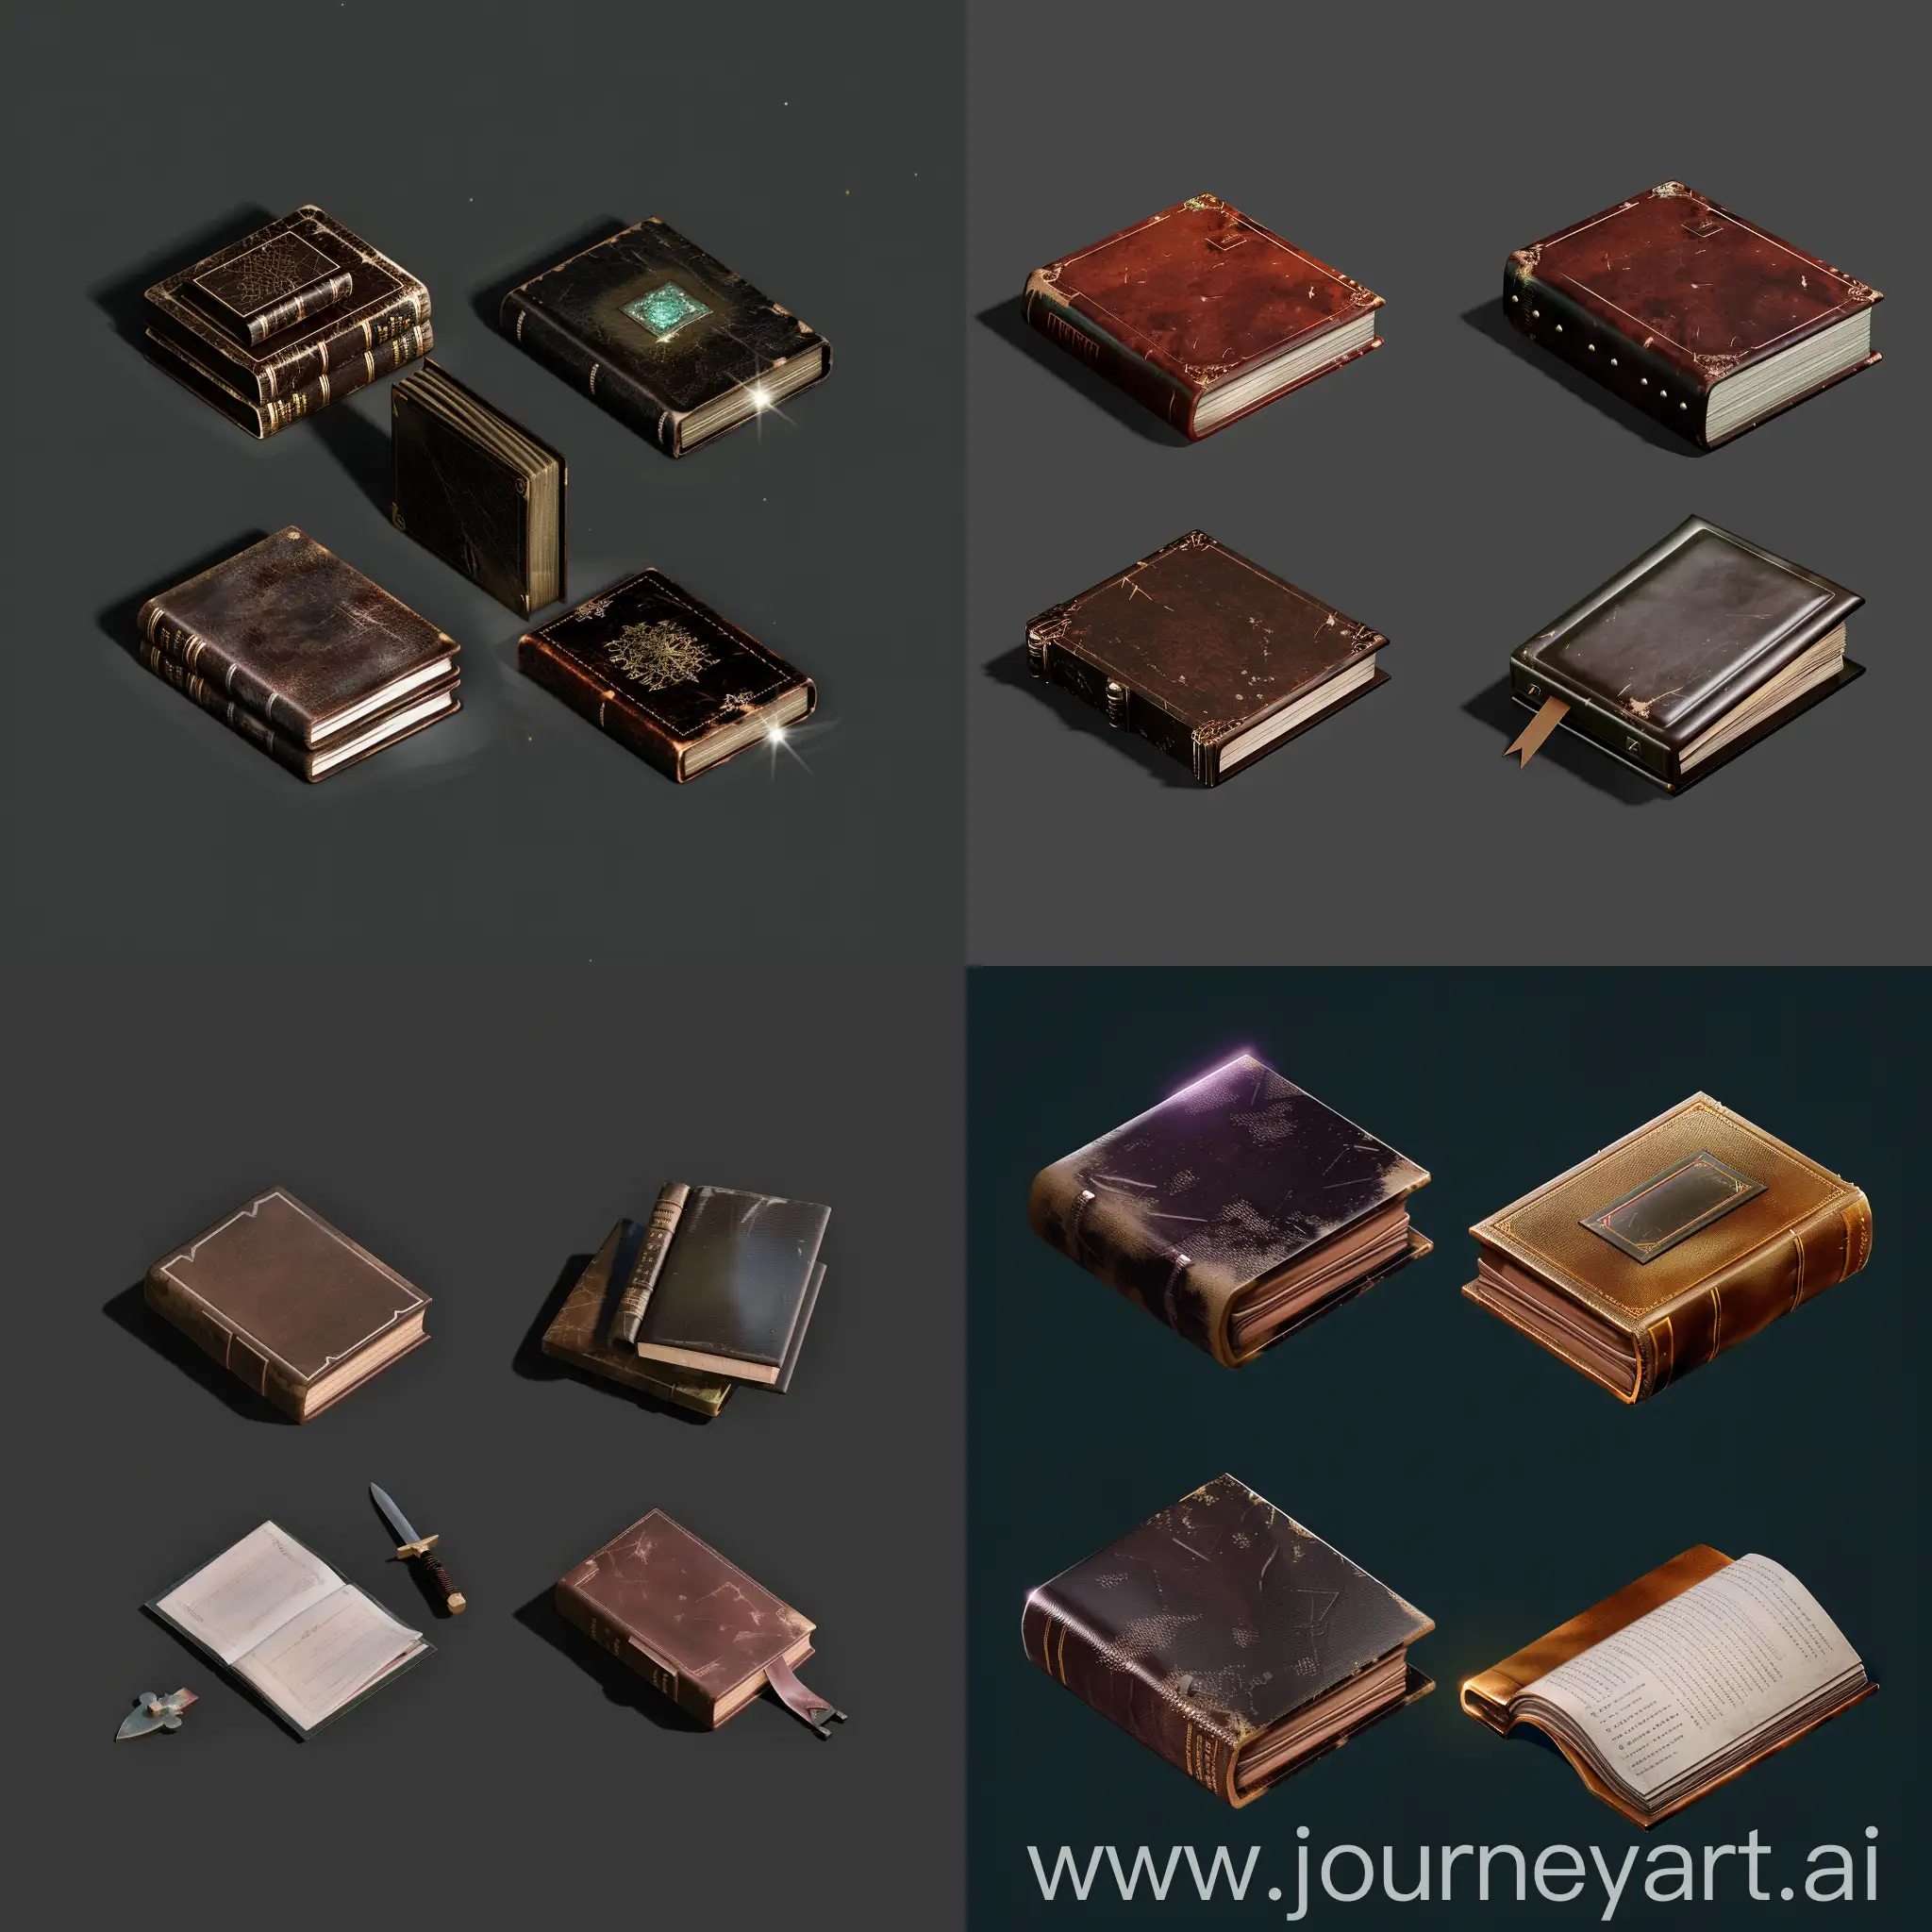 Isometric-Set-of-Old-Worn-Leather-Books-Realistic-3D-Game-Asset